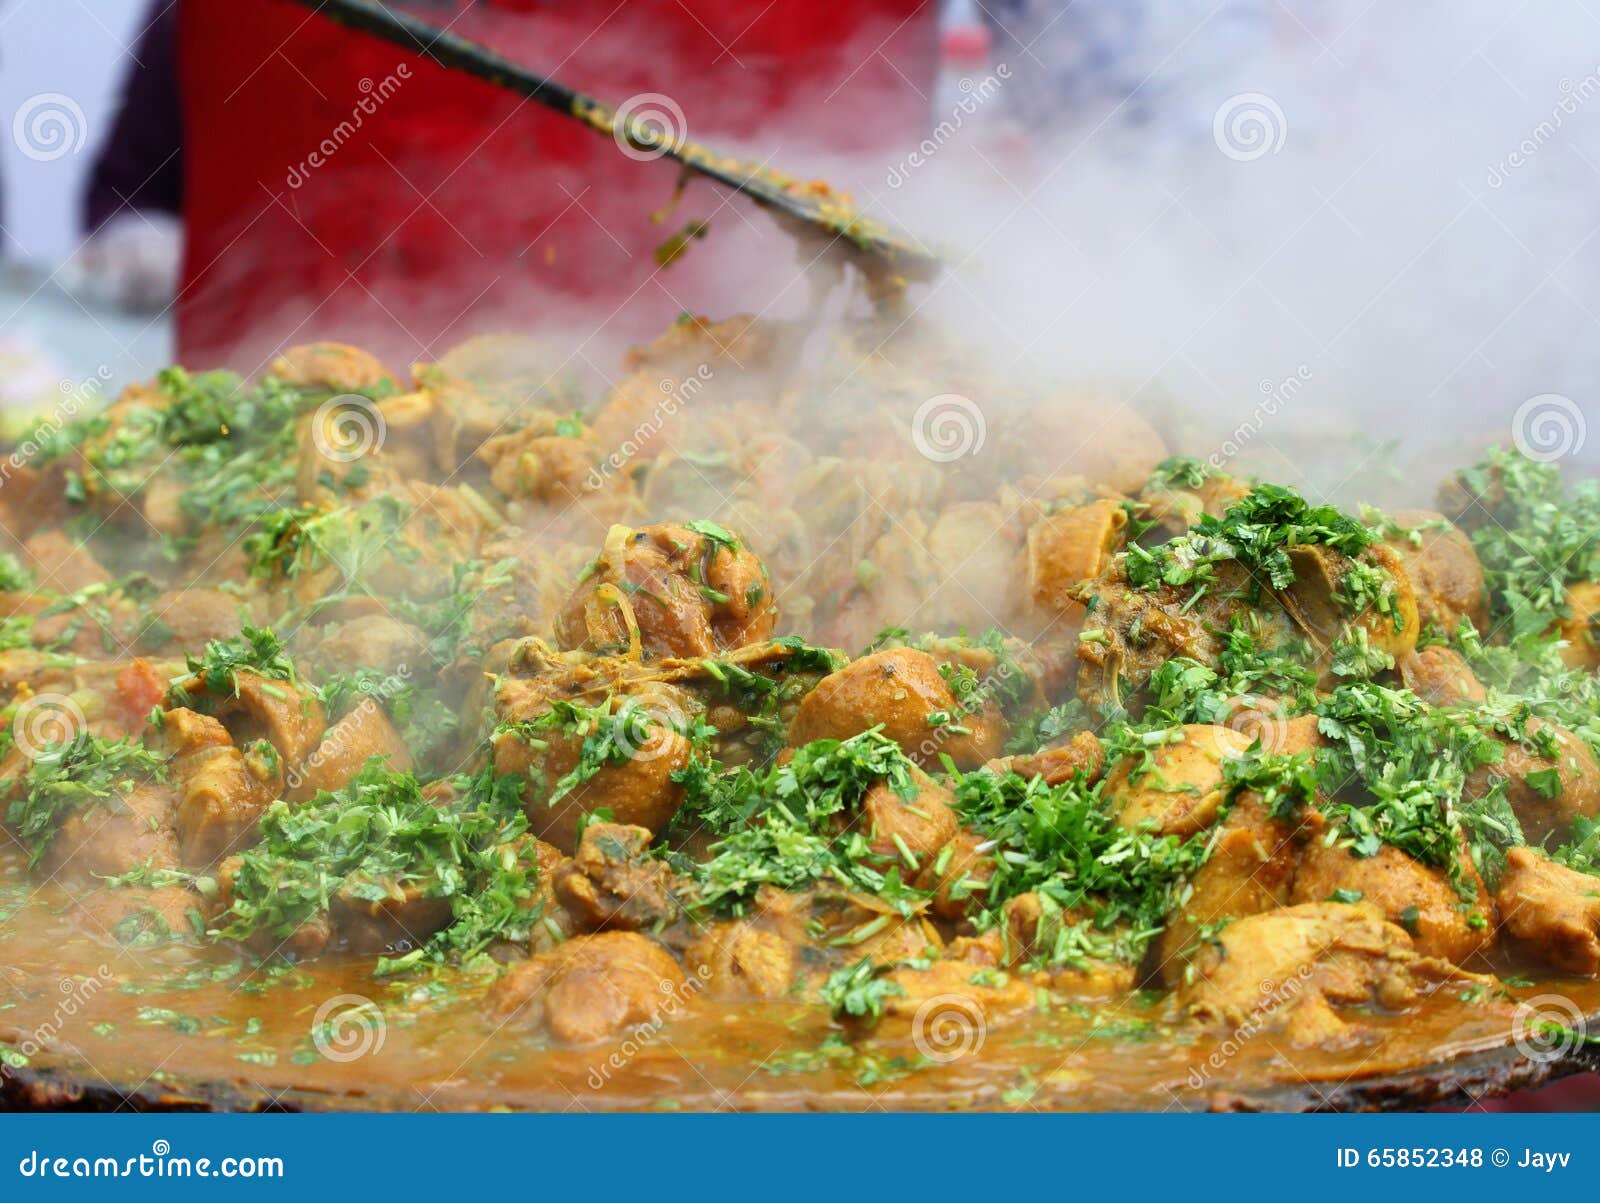 Indian Chicken Curry in Balti Dish Stock Image - Image of cilantro, spicy:  43242171